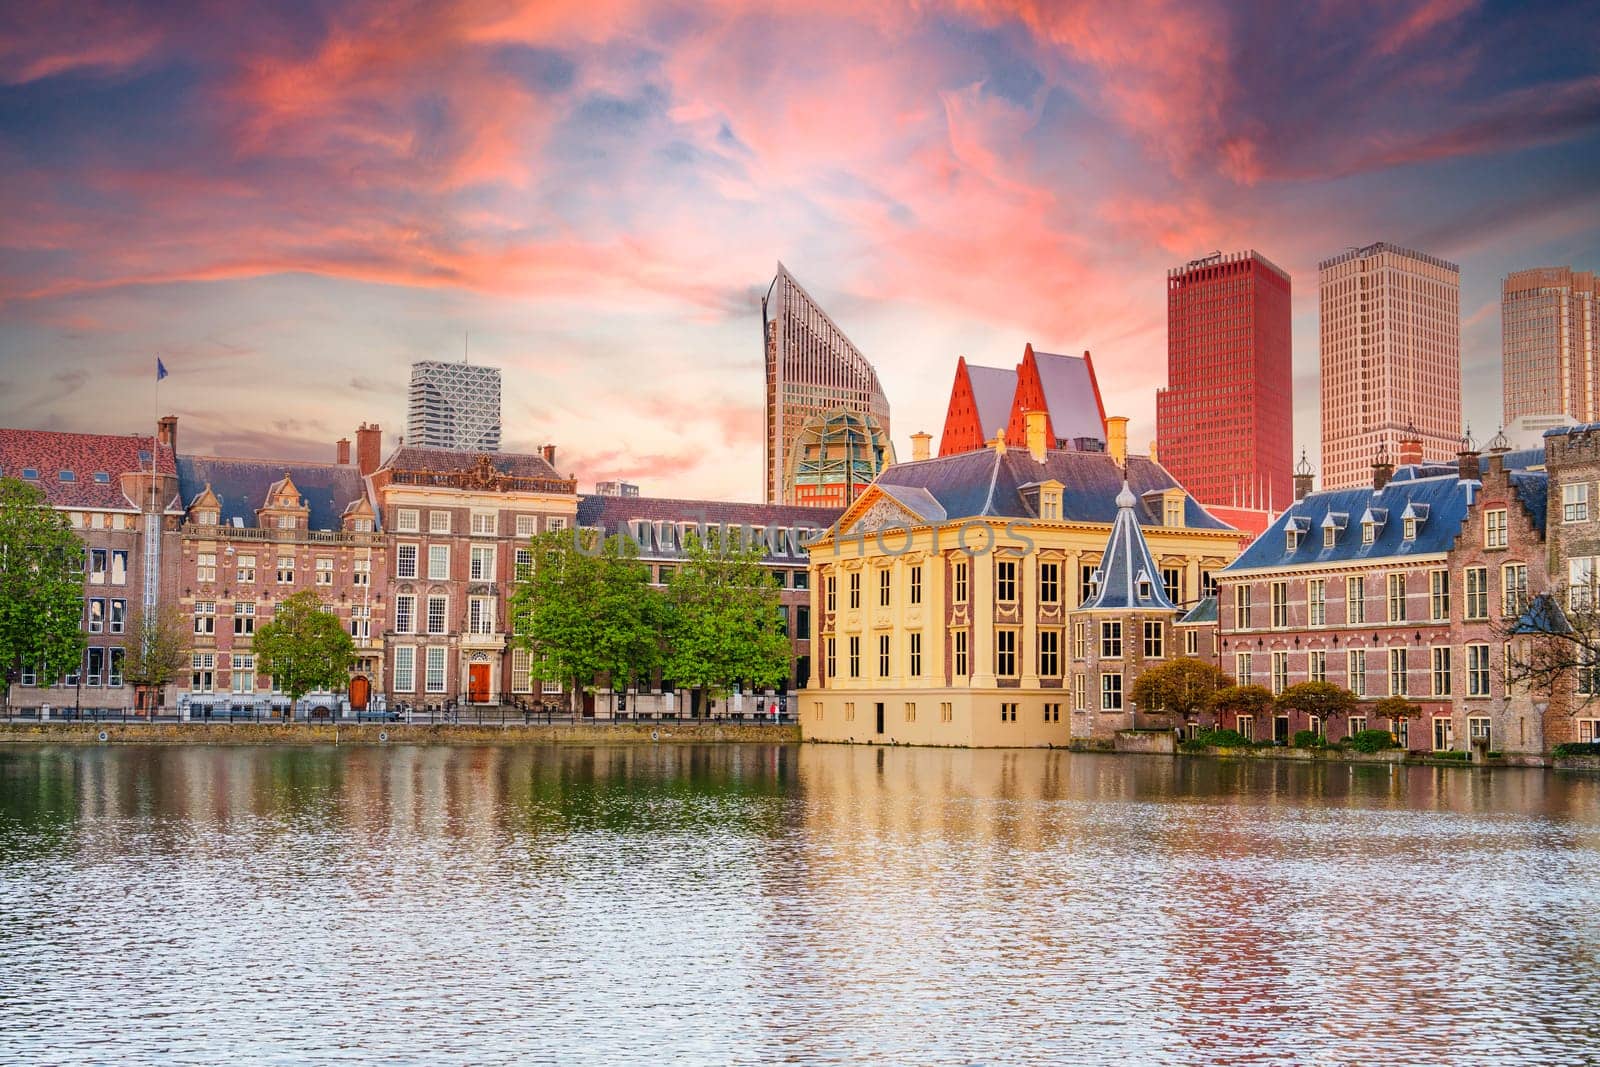 The Hague Ridderzaal in Binnenhof, Hofvijver lake Meeting place of States General of the Netherlands by PhotoTime